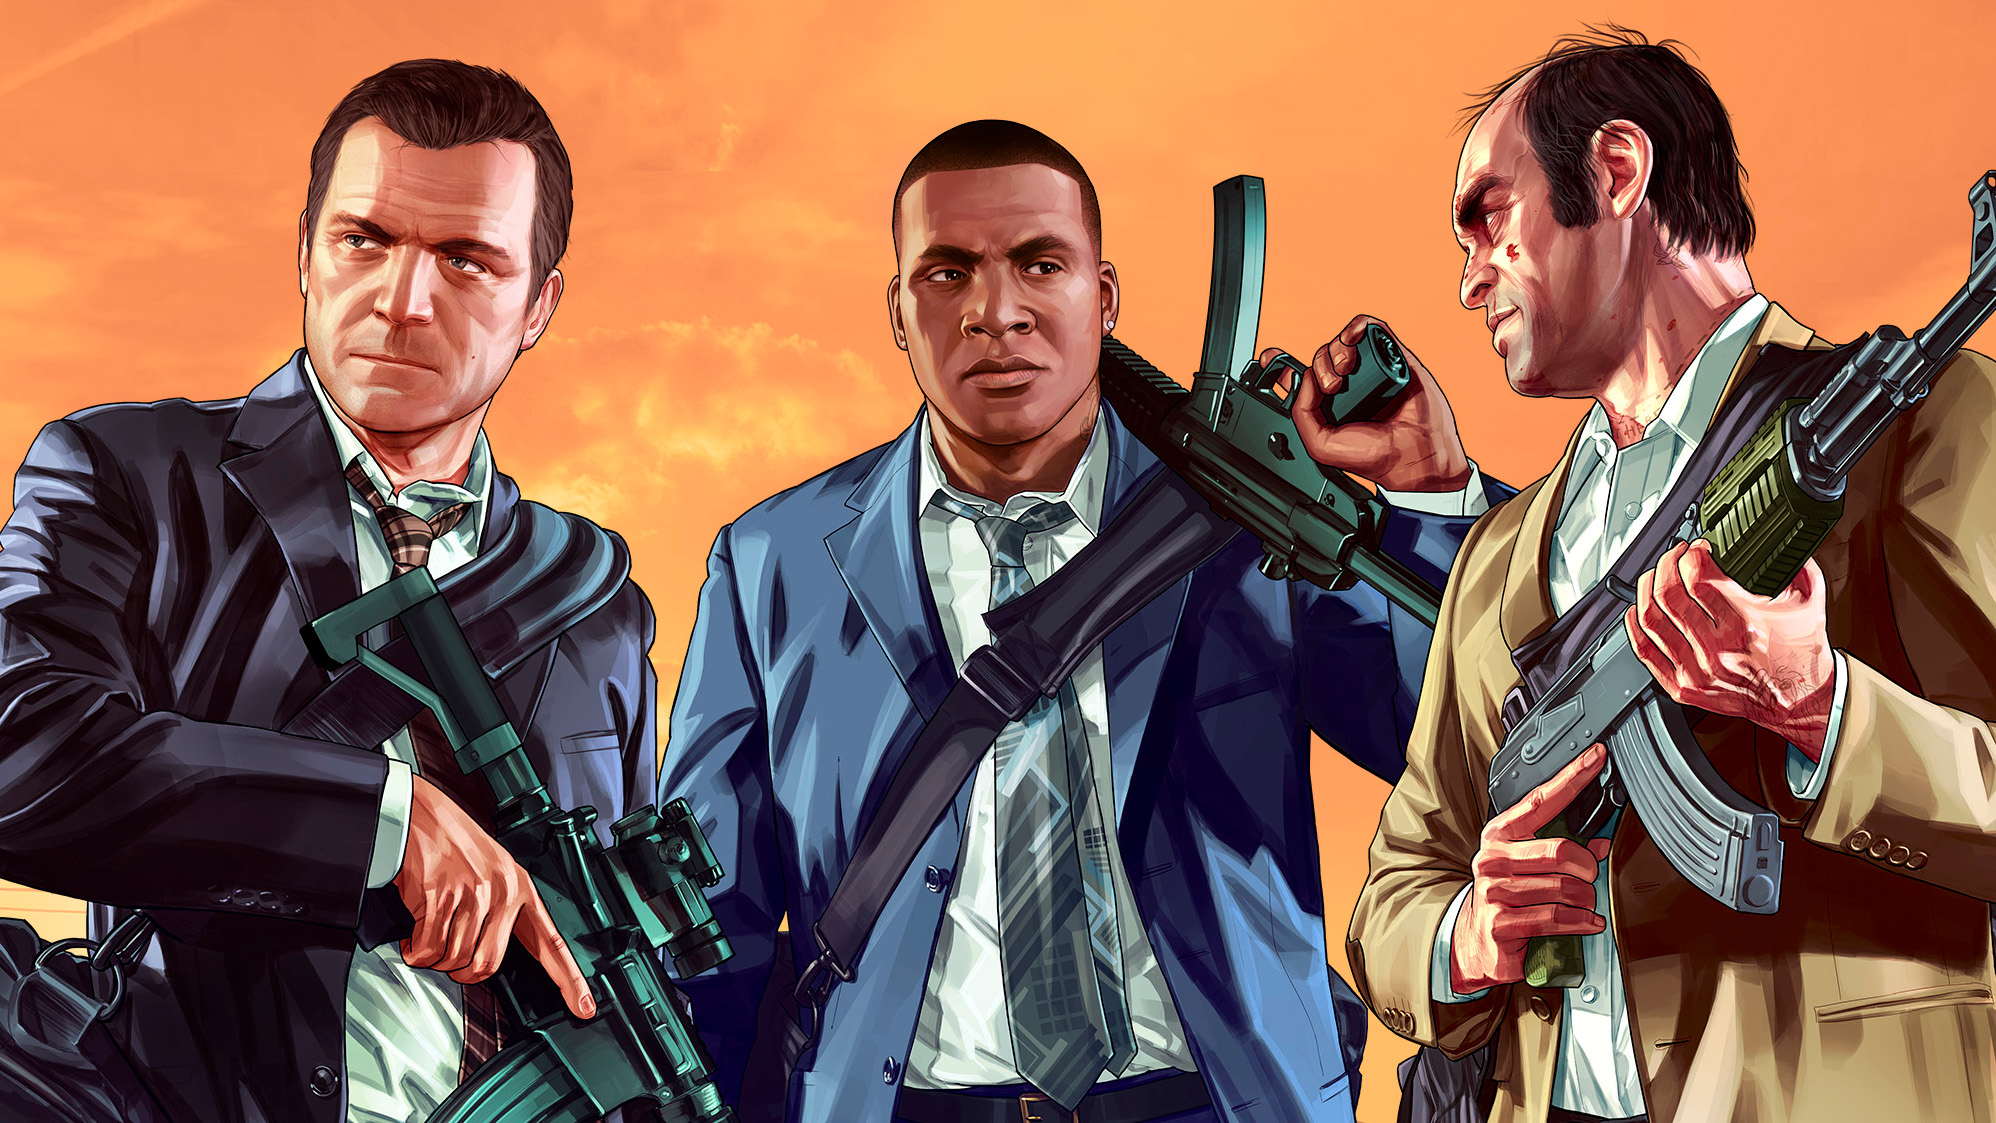 Rockstar Games announces trailer for 'Grand Theft Auto 6' is coming in  December - X101 Always Classic